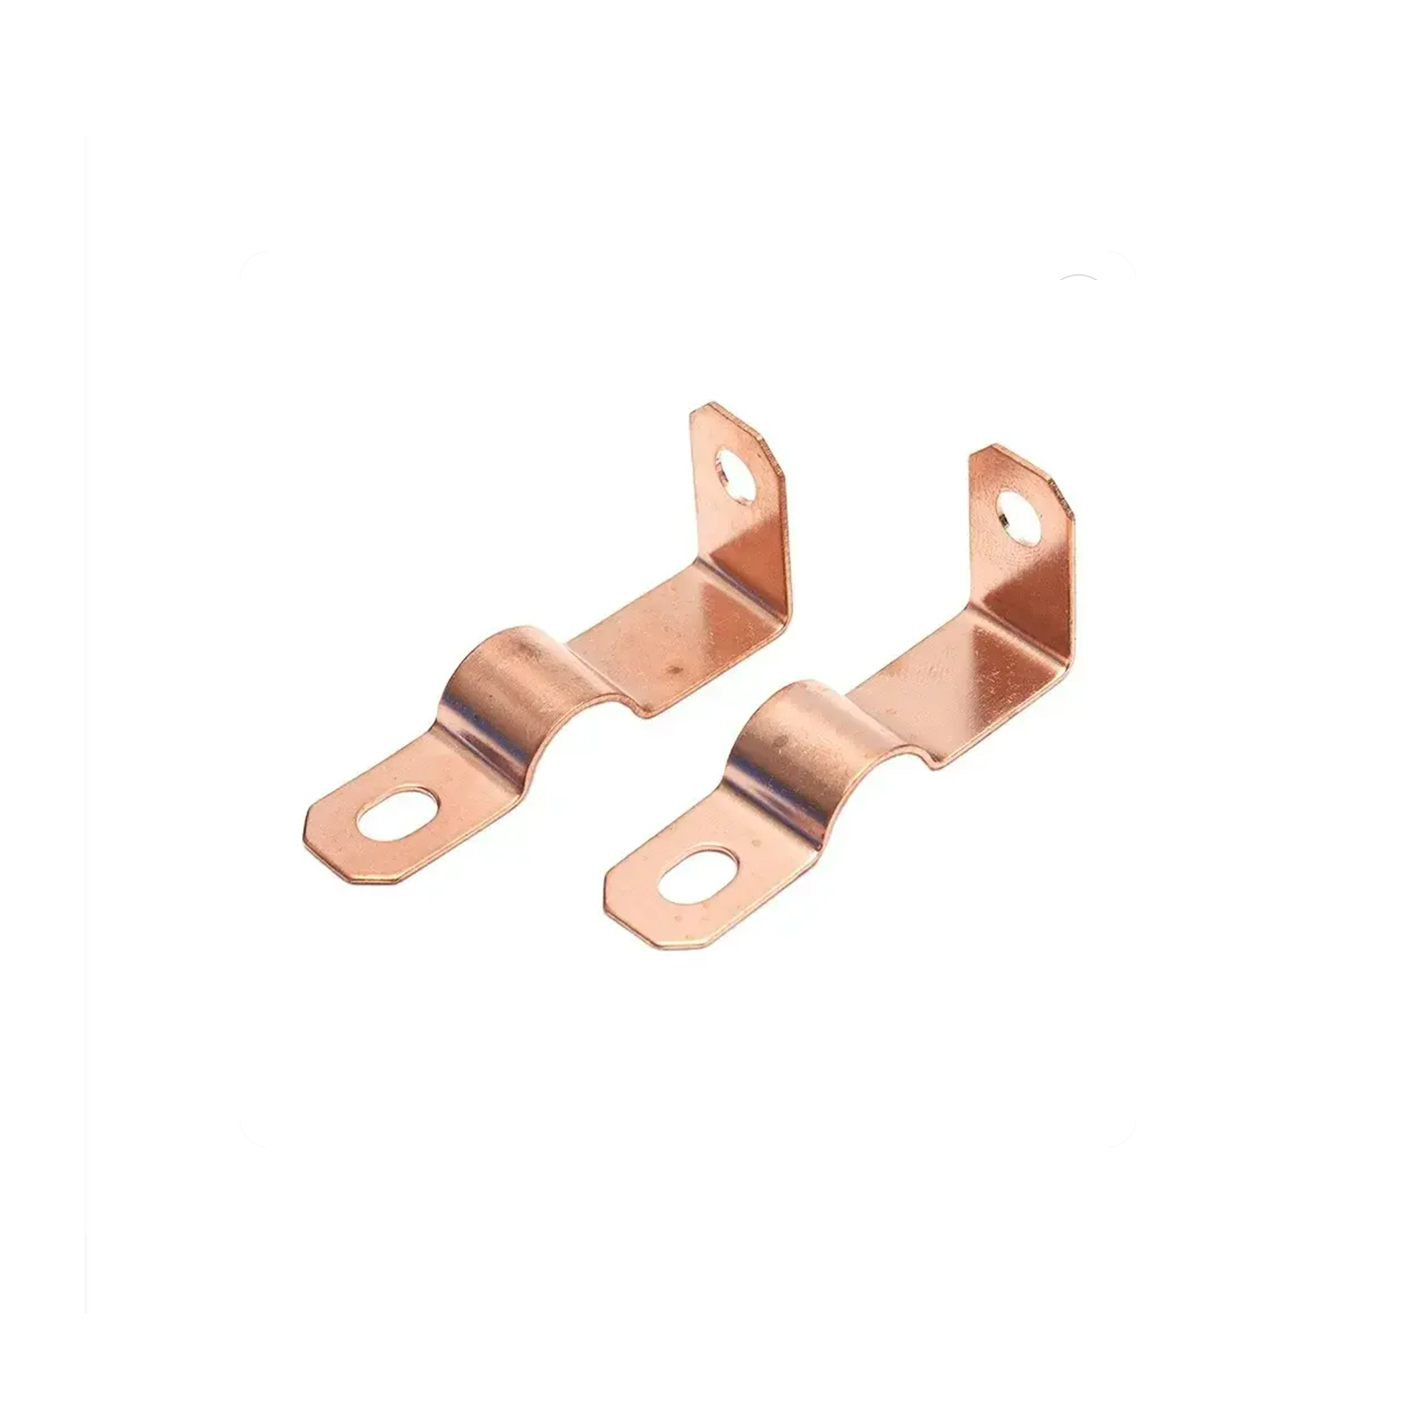 Customized copper material transformer spare parts